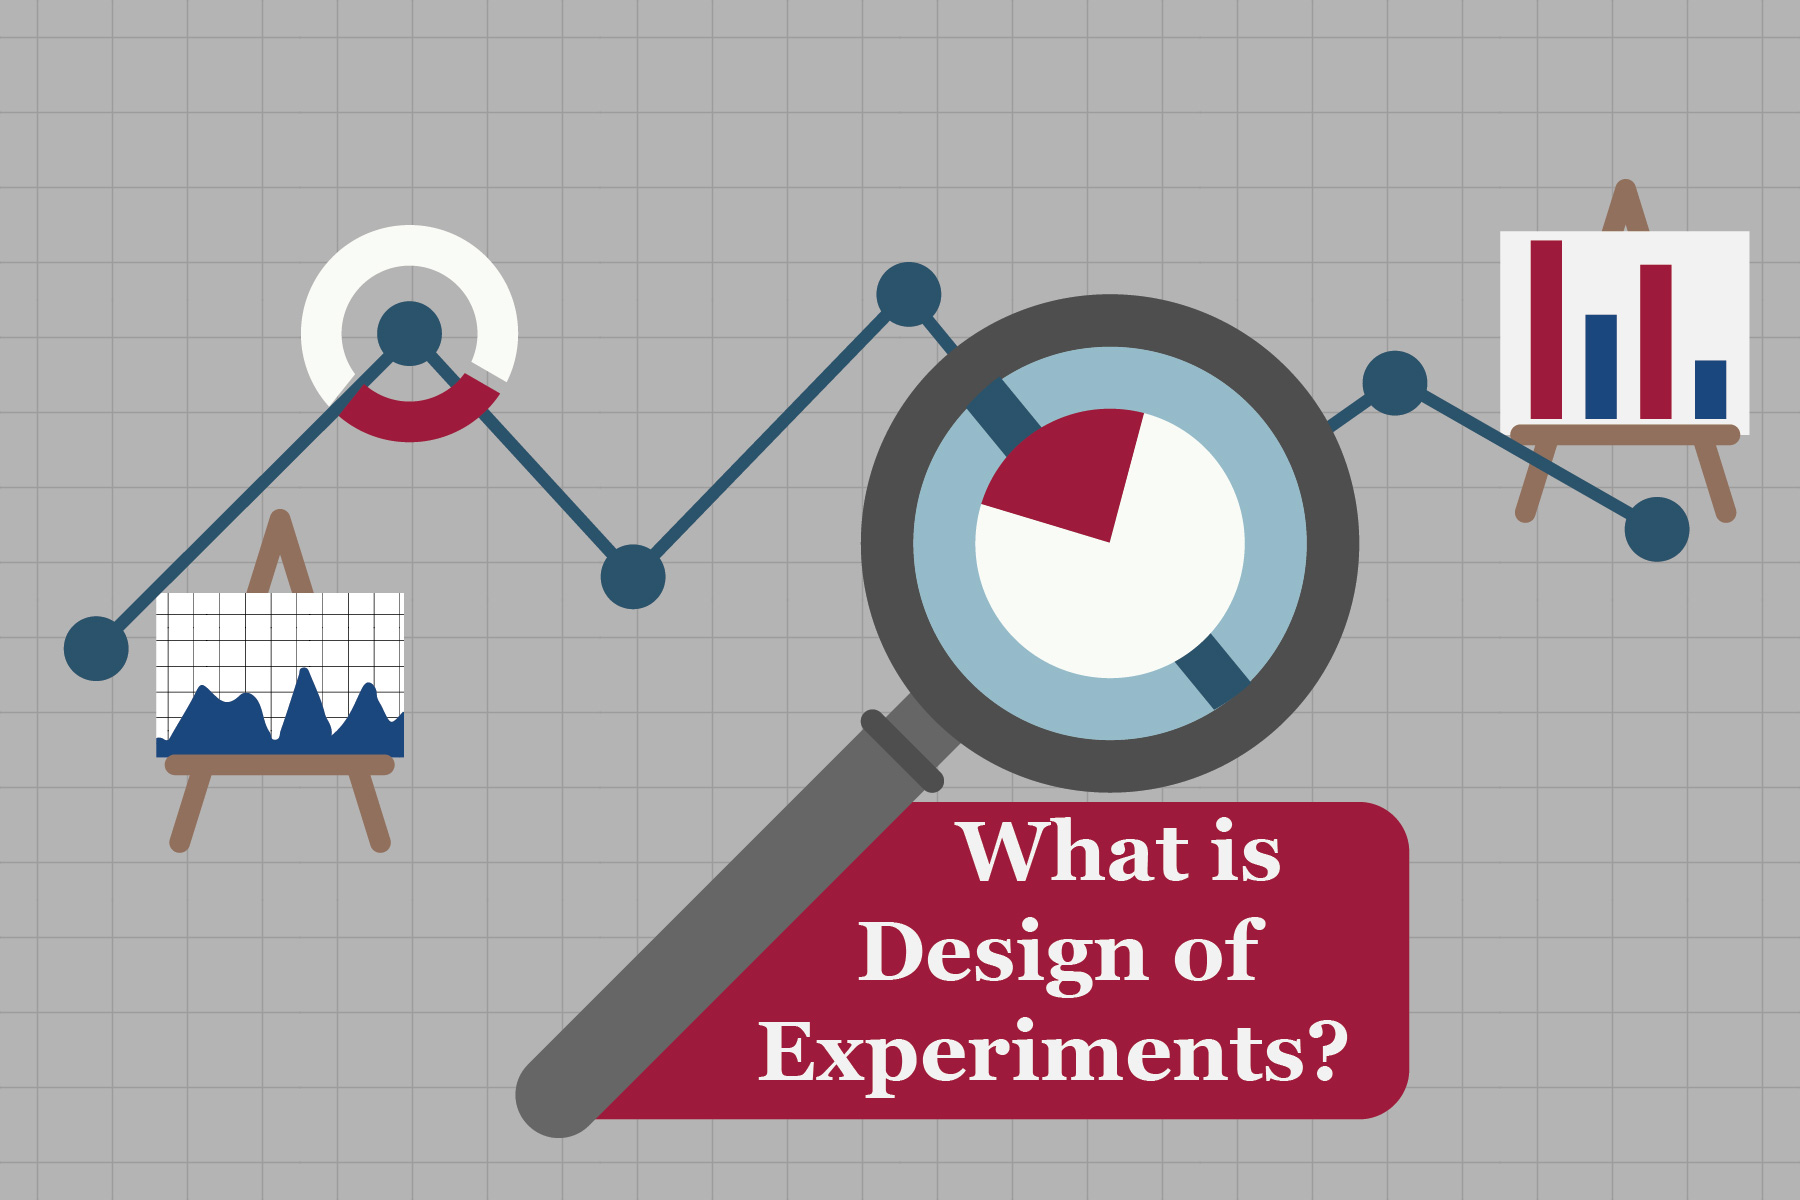 What is Design of Experiments?